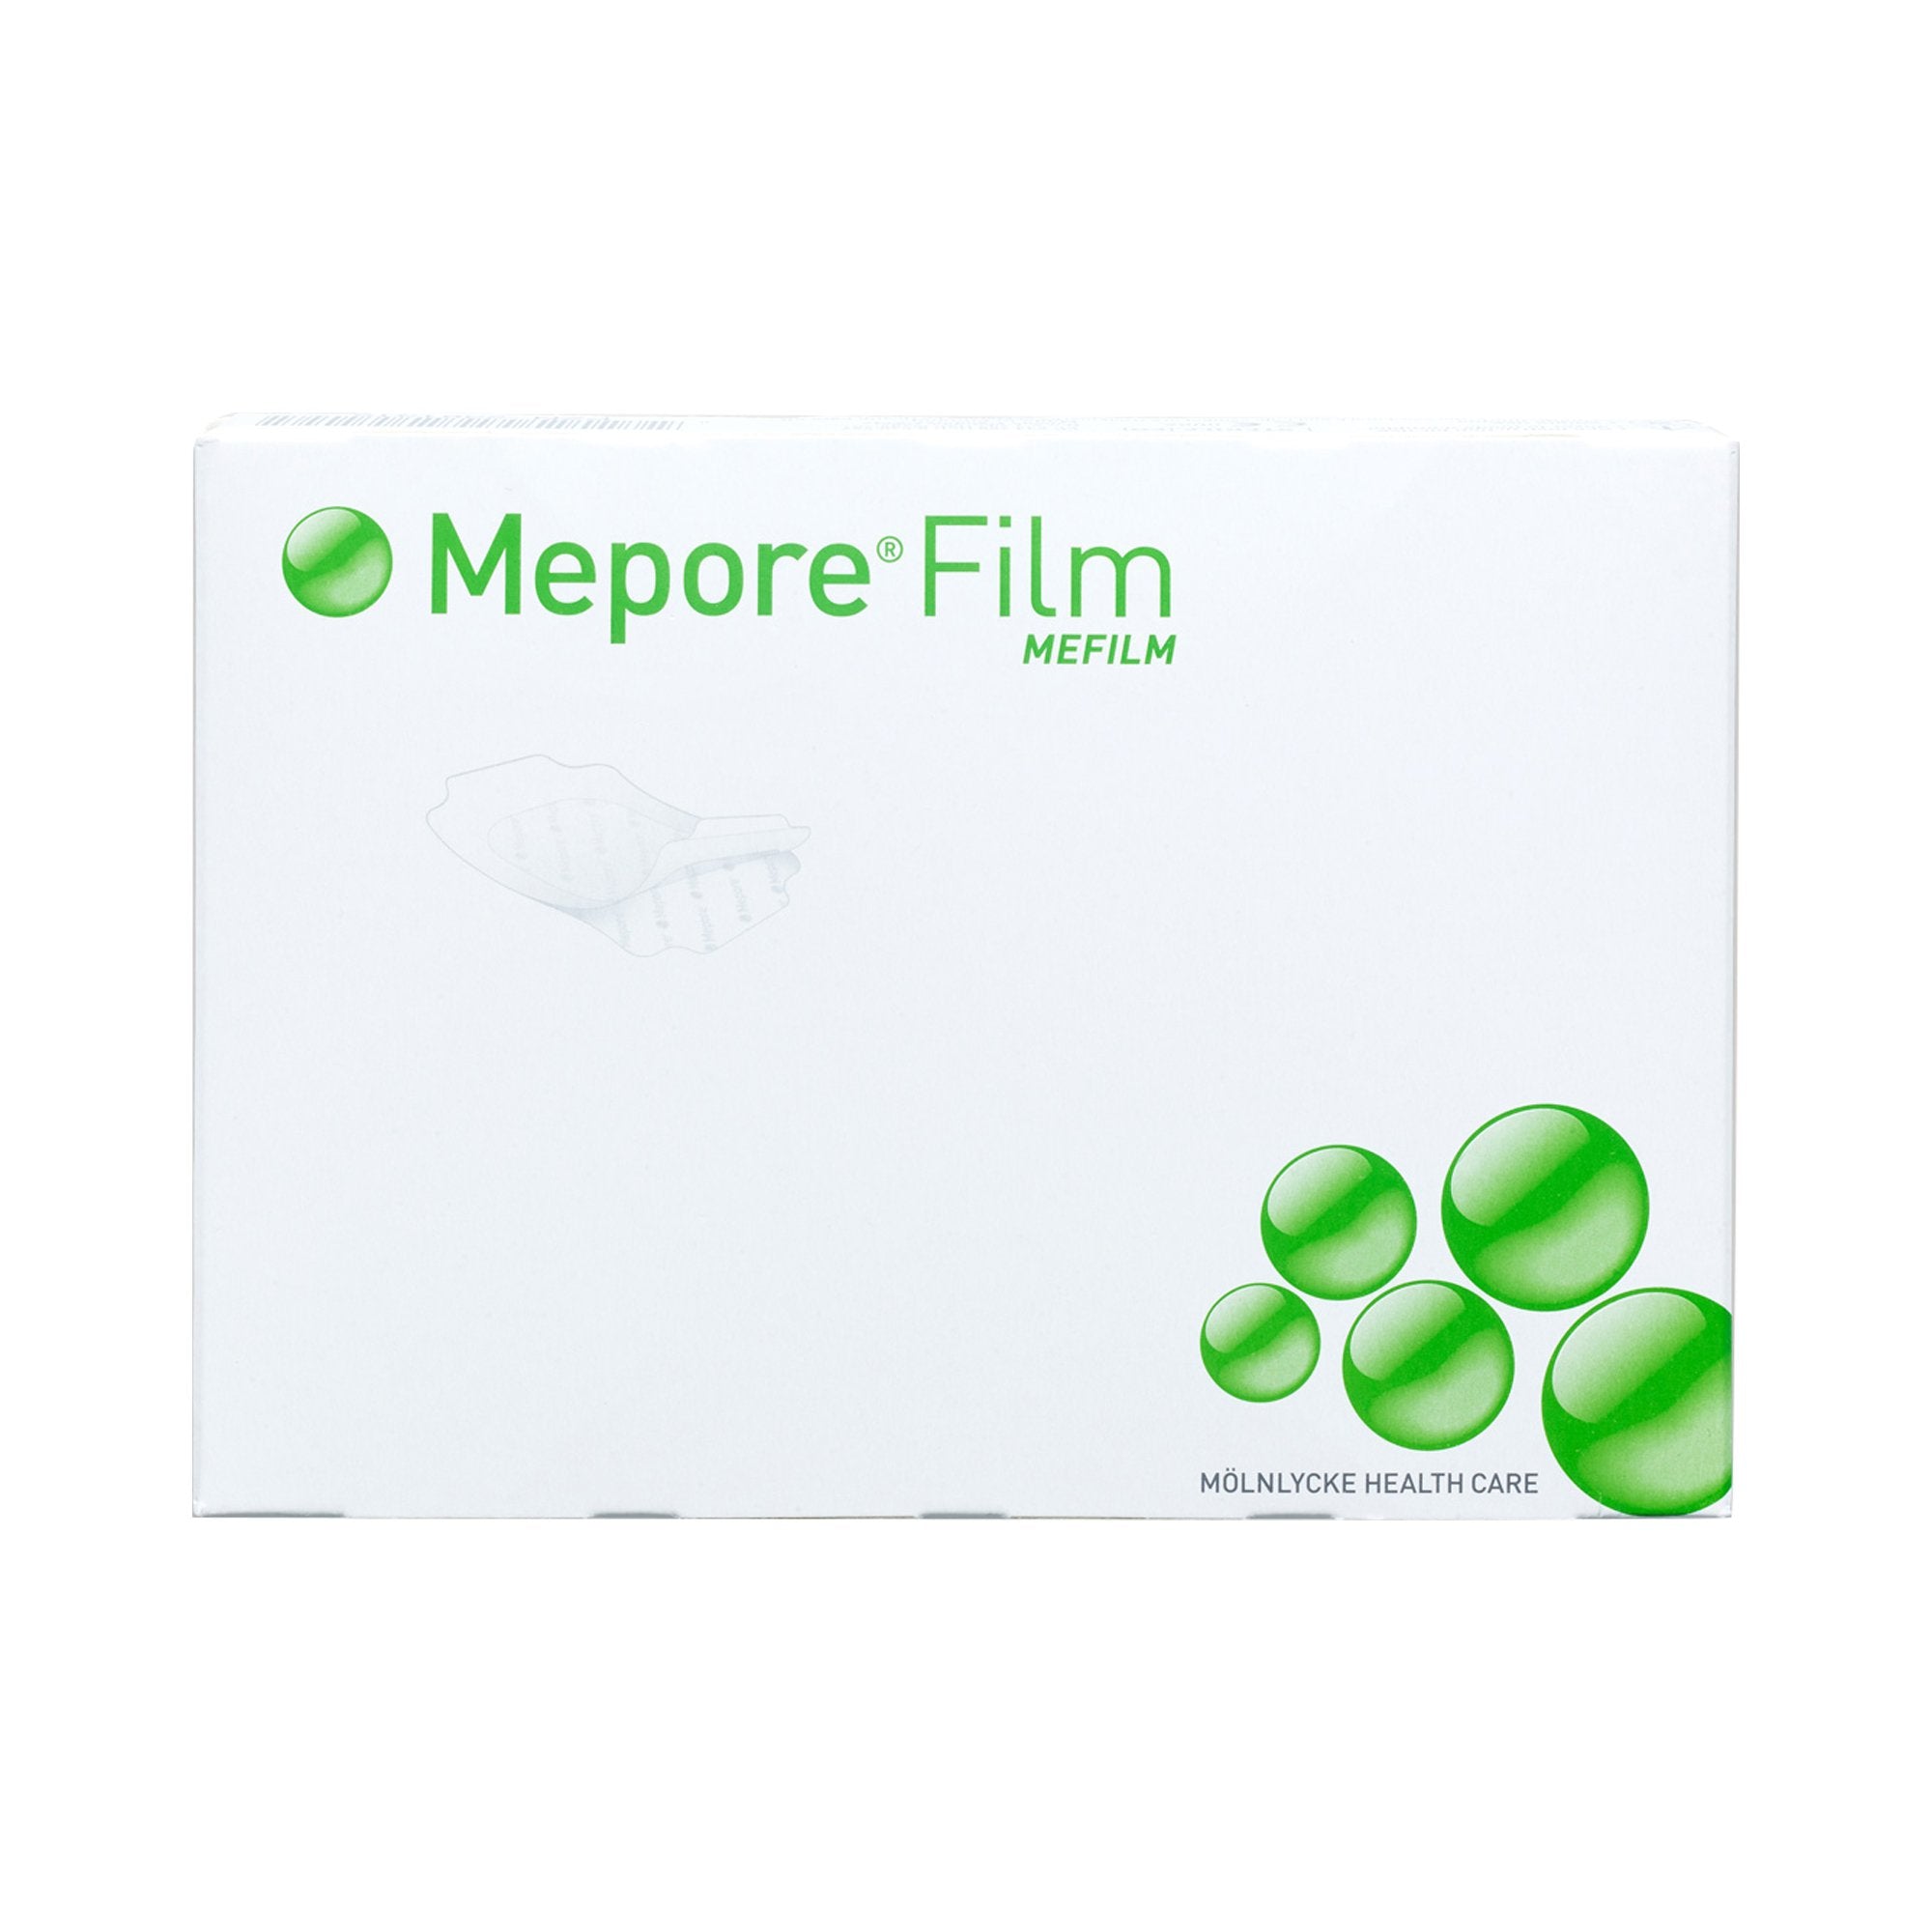 Transparent Film Dressing Mepore® Film 6 X 8-1/2 Inch Frame Style Delivery Rectangle Sterile